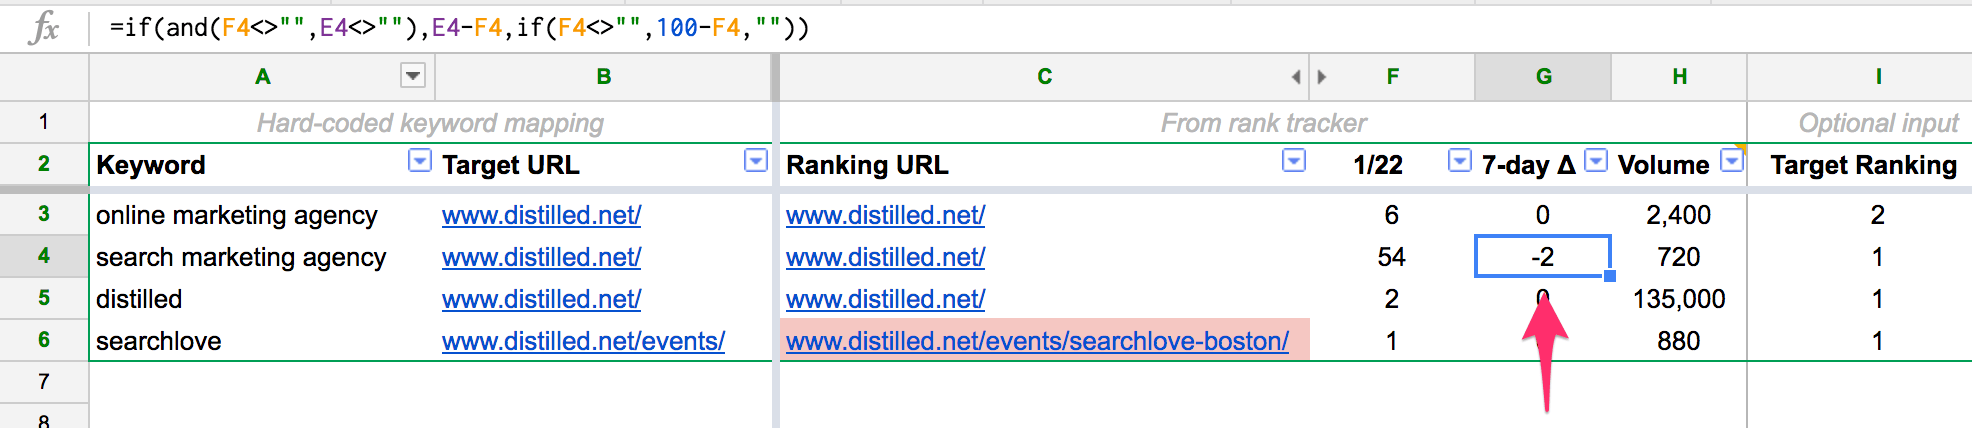 tools blog rankings have changed